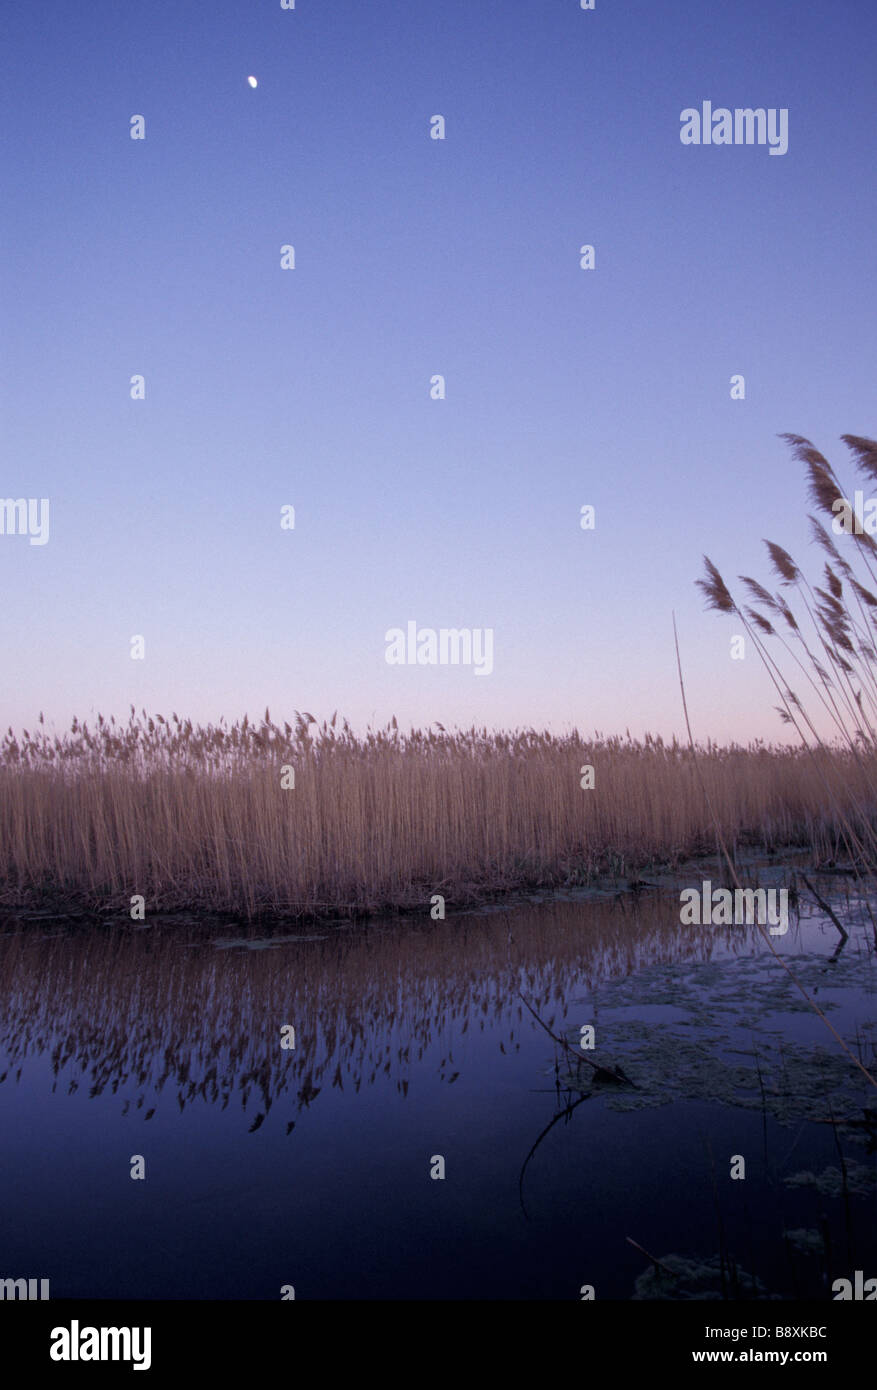 First Quarter Moon in Clear Evening Sky over Wetland and Grasses Stock Photo